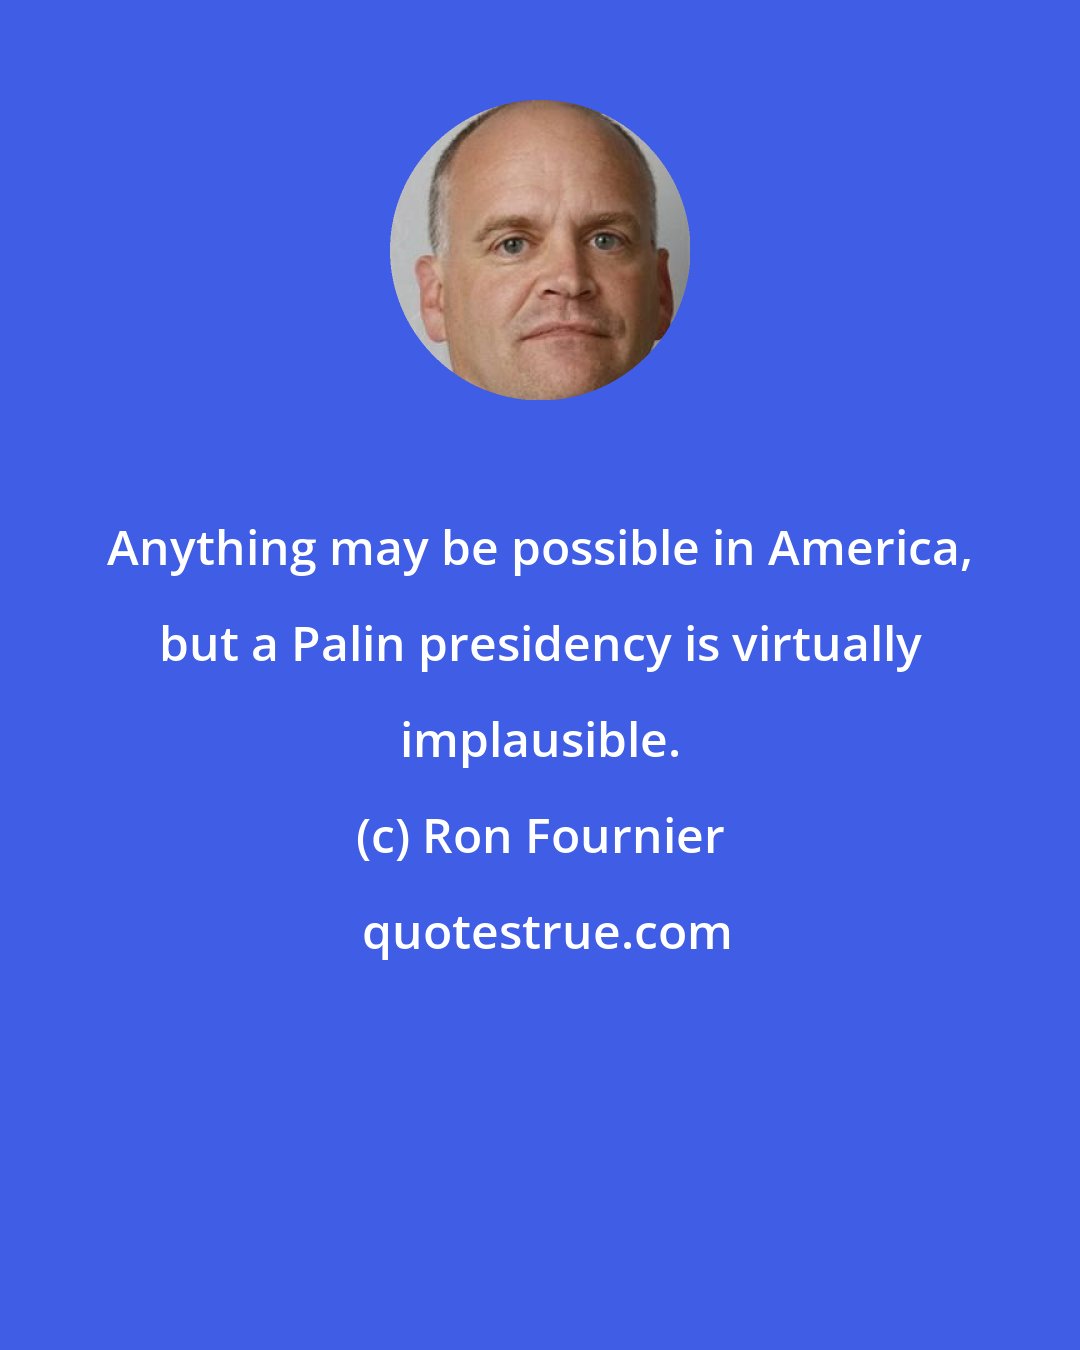 Ron Fournier: Anything may be possible in America, but a Palin presidency is virtually implausible.